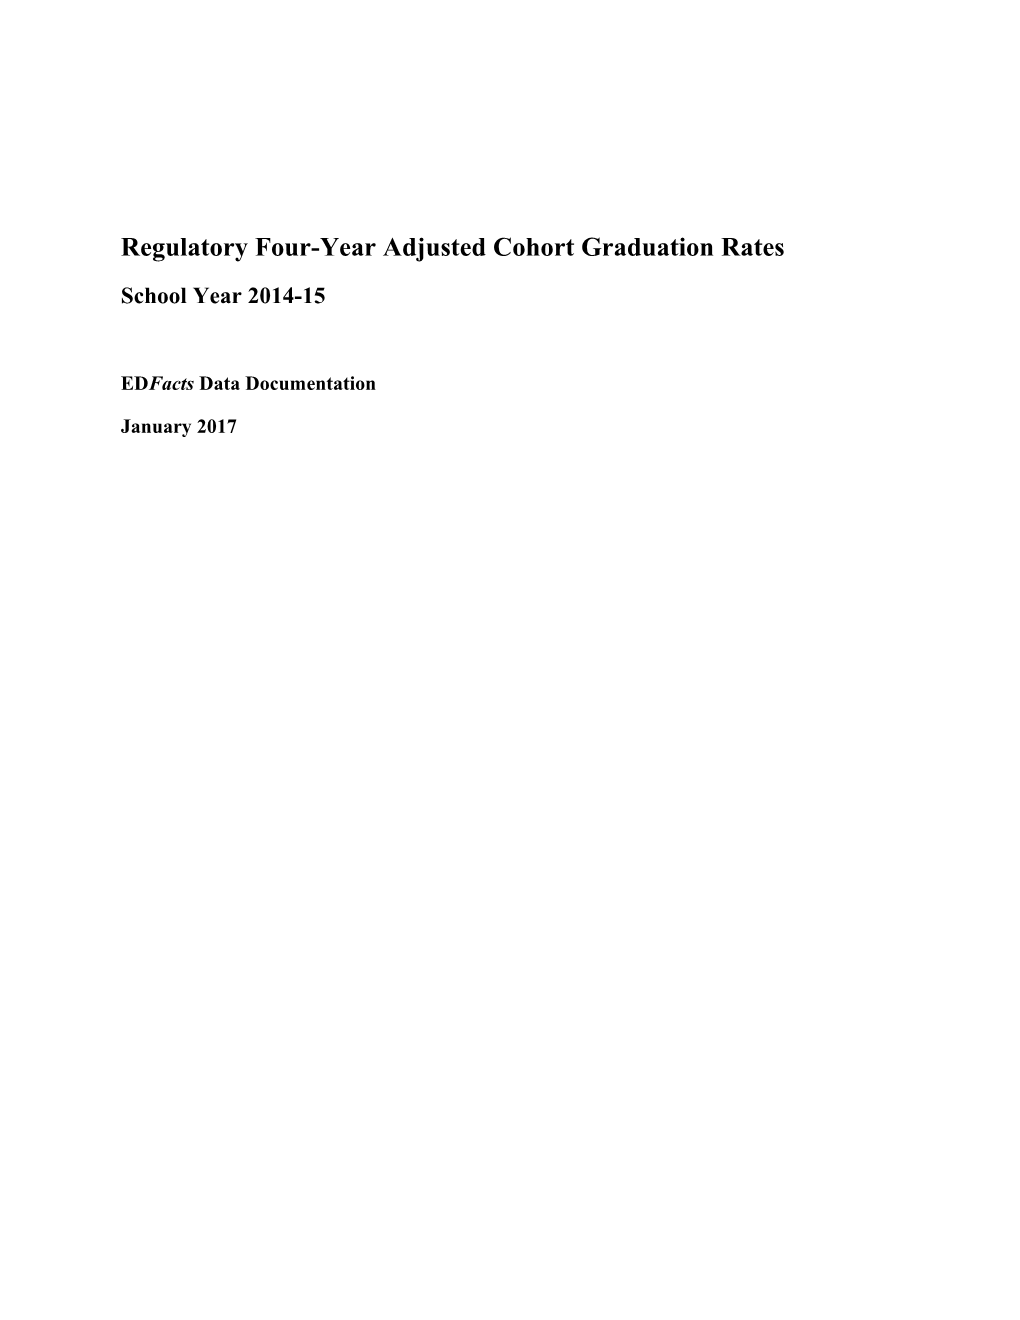 Regulatory Four-Year Adjusted Cohort Graduation Rates SY 2014-15 (Msword)